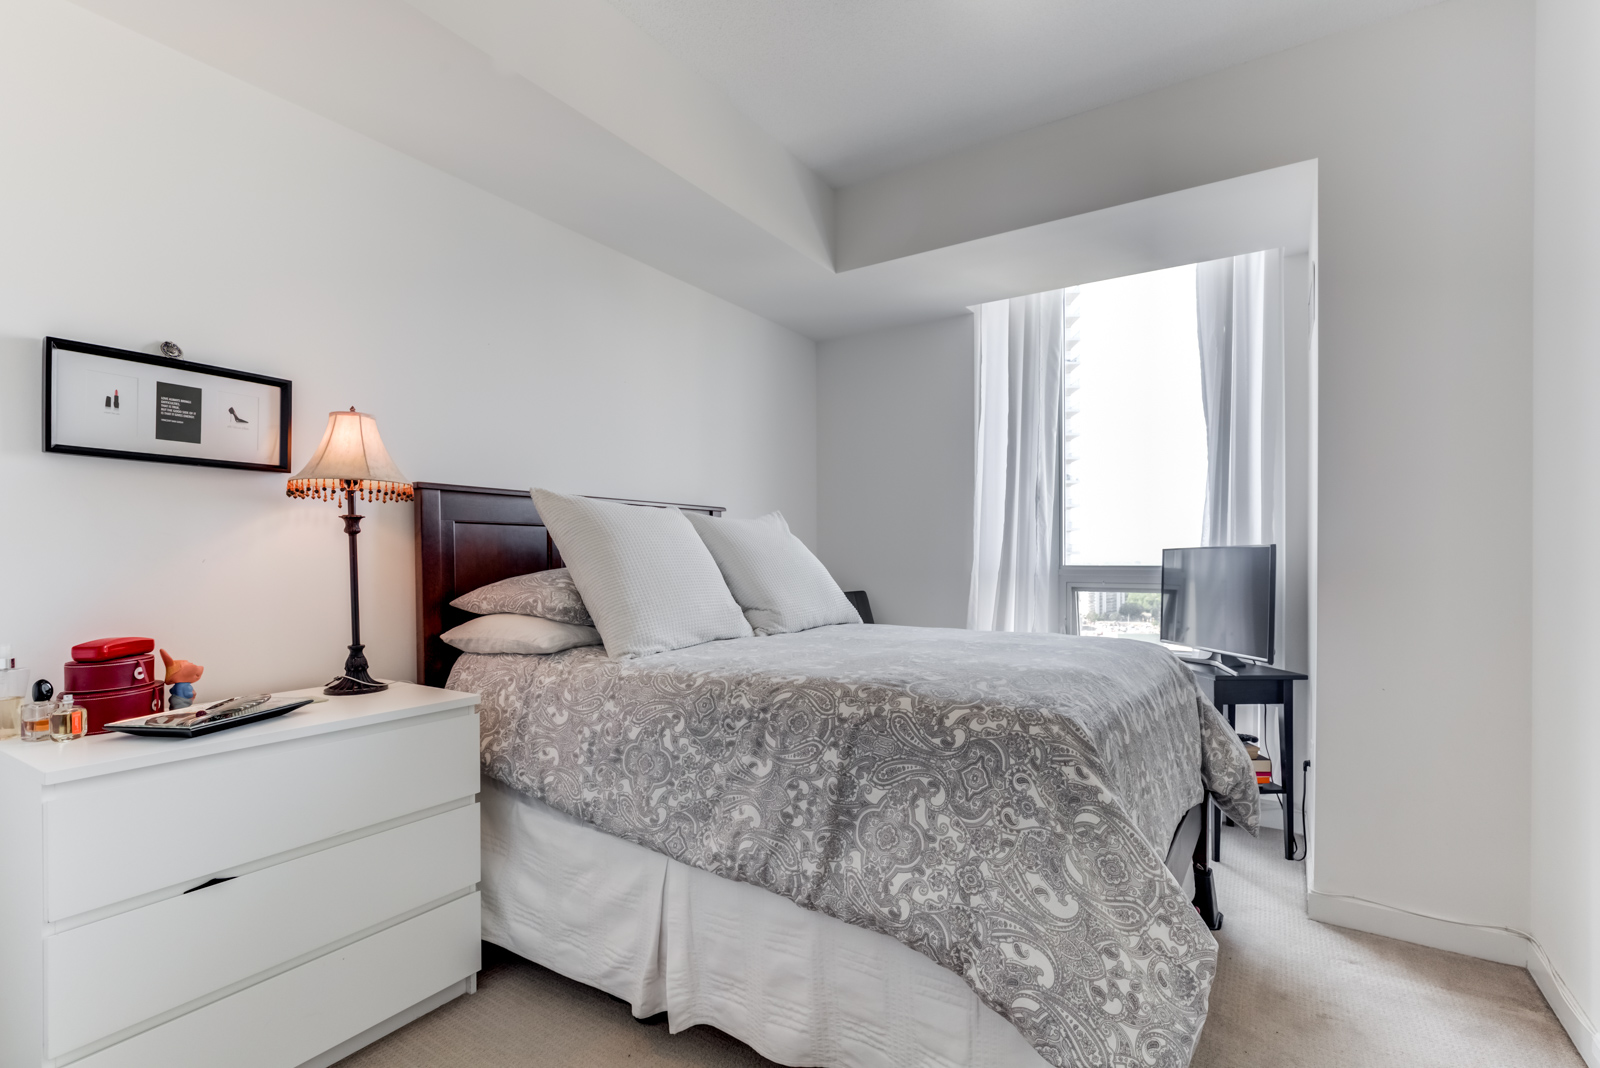 Second bedroom at 62 Forest Manor Rd Unit 1803, Toronto with large bed, gray walls, bedside table and lamp.